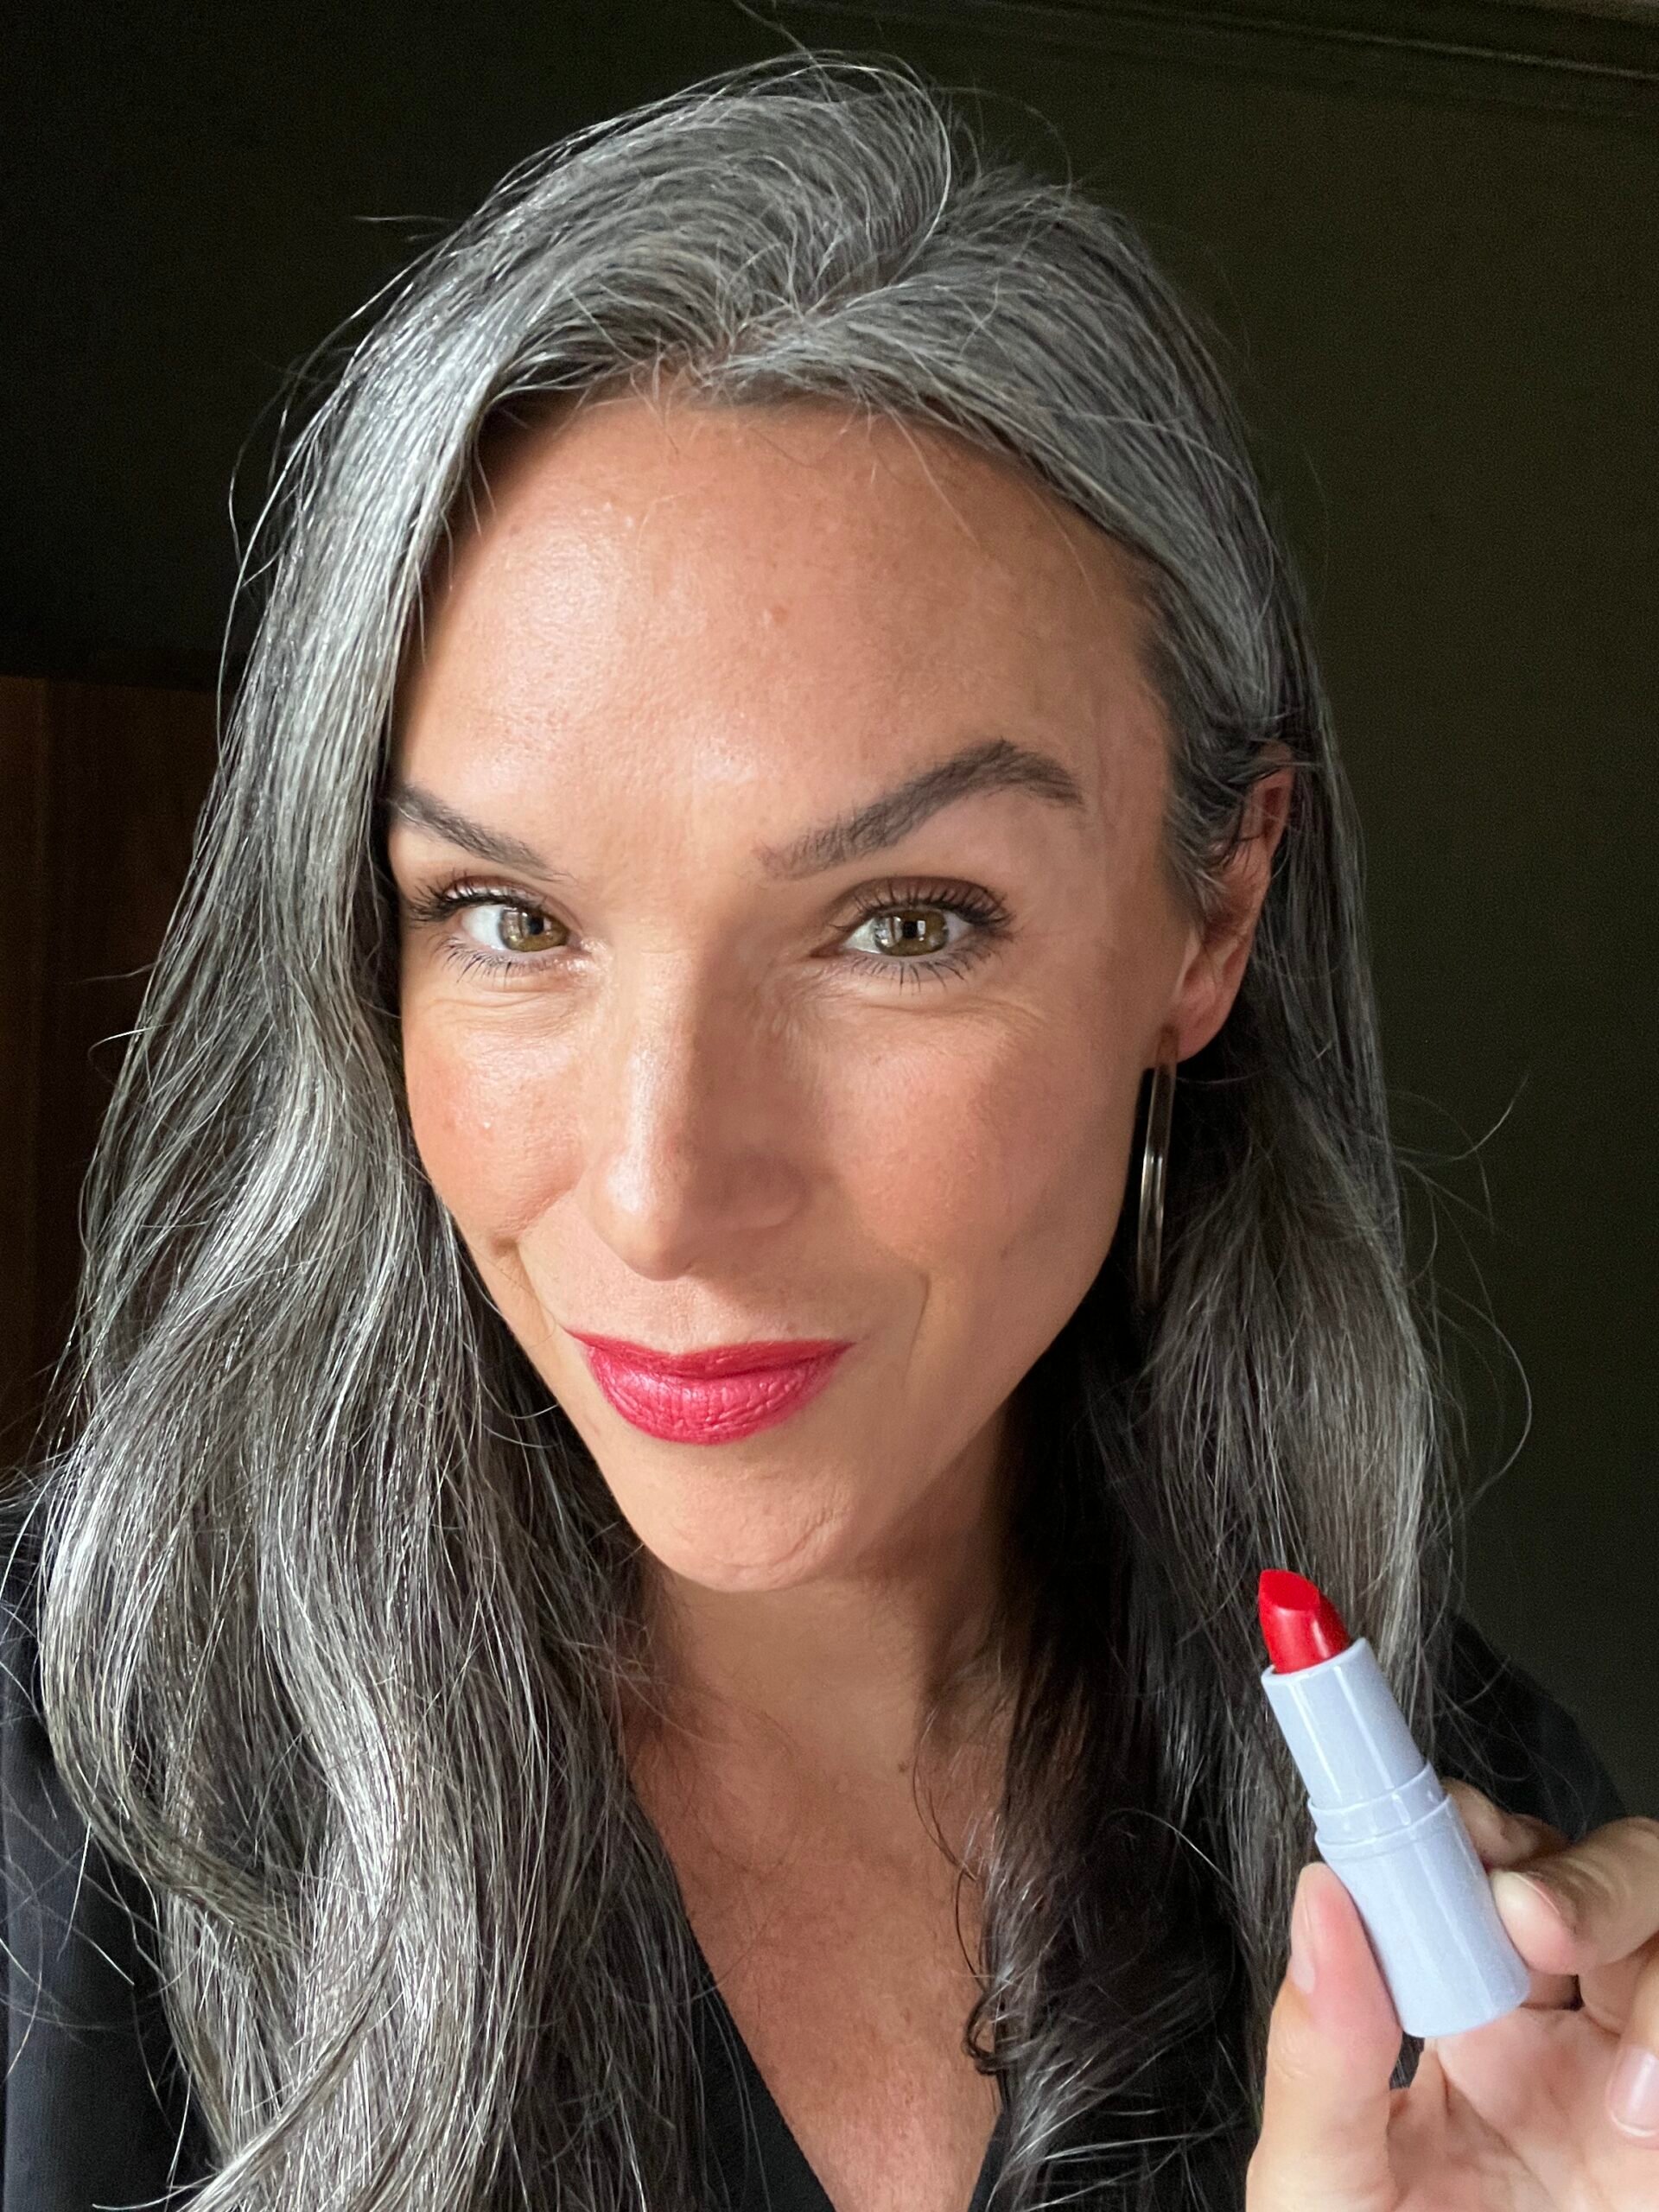 A woman wears Clover Comfy Matte Lipstick in Retro on her lips and holds up a tube of the lipstick.